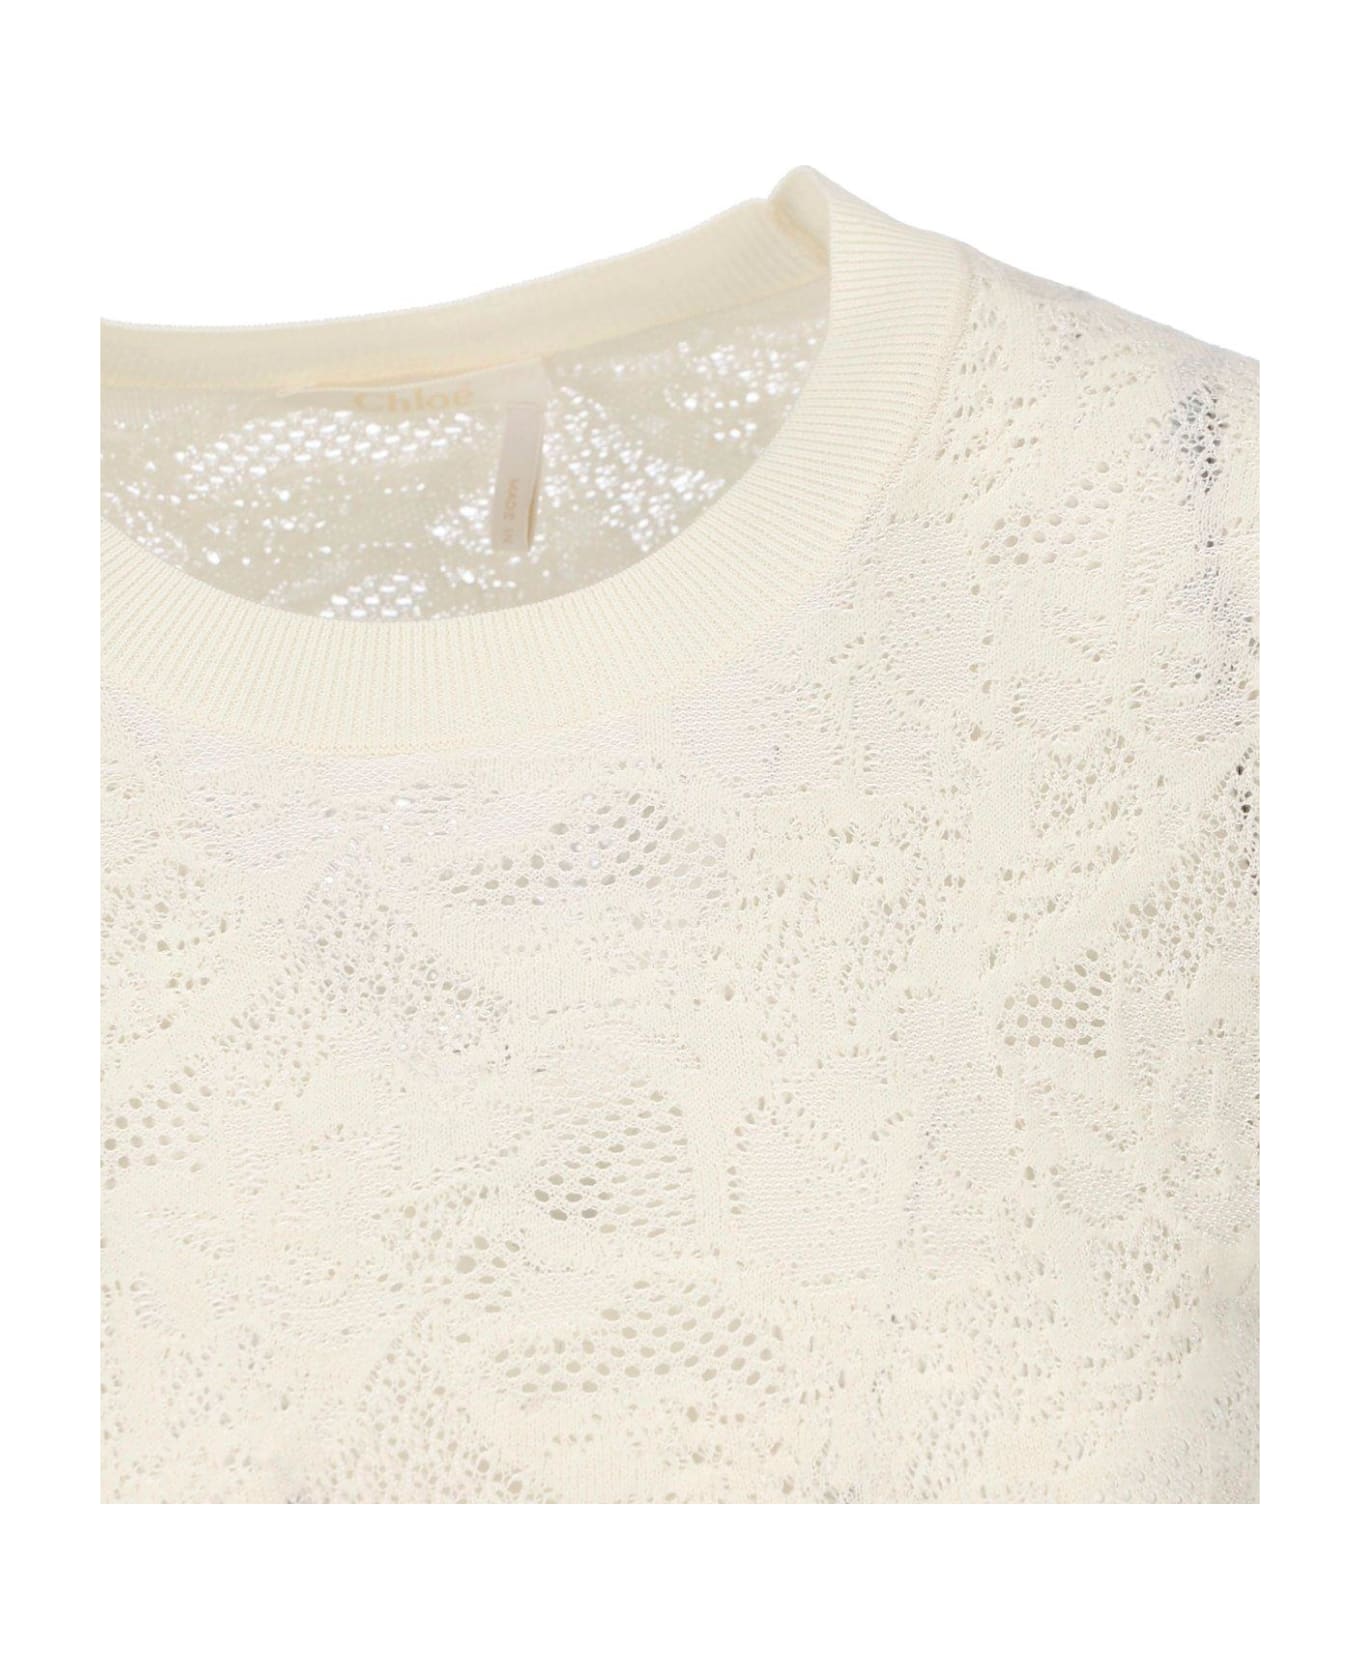 Chloé Guipure Effect Top - White トップス